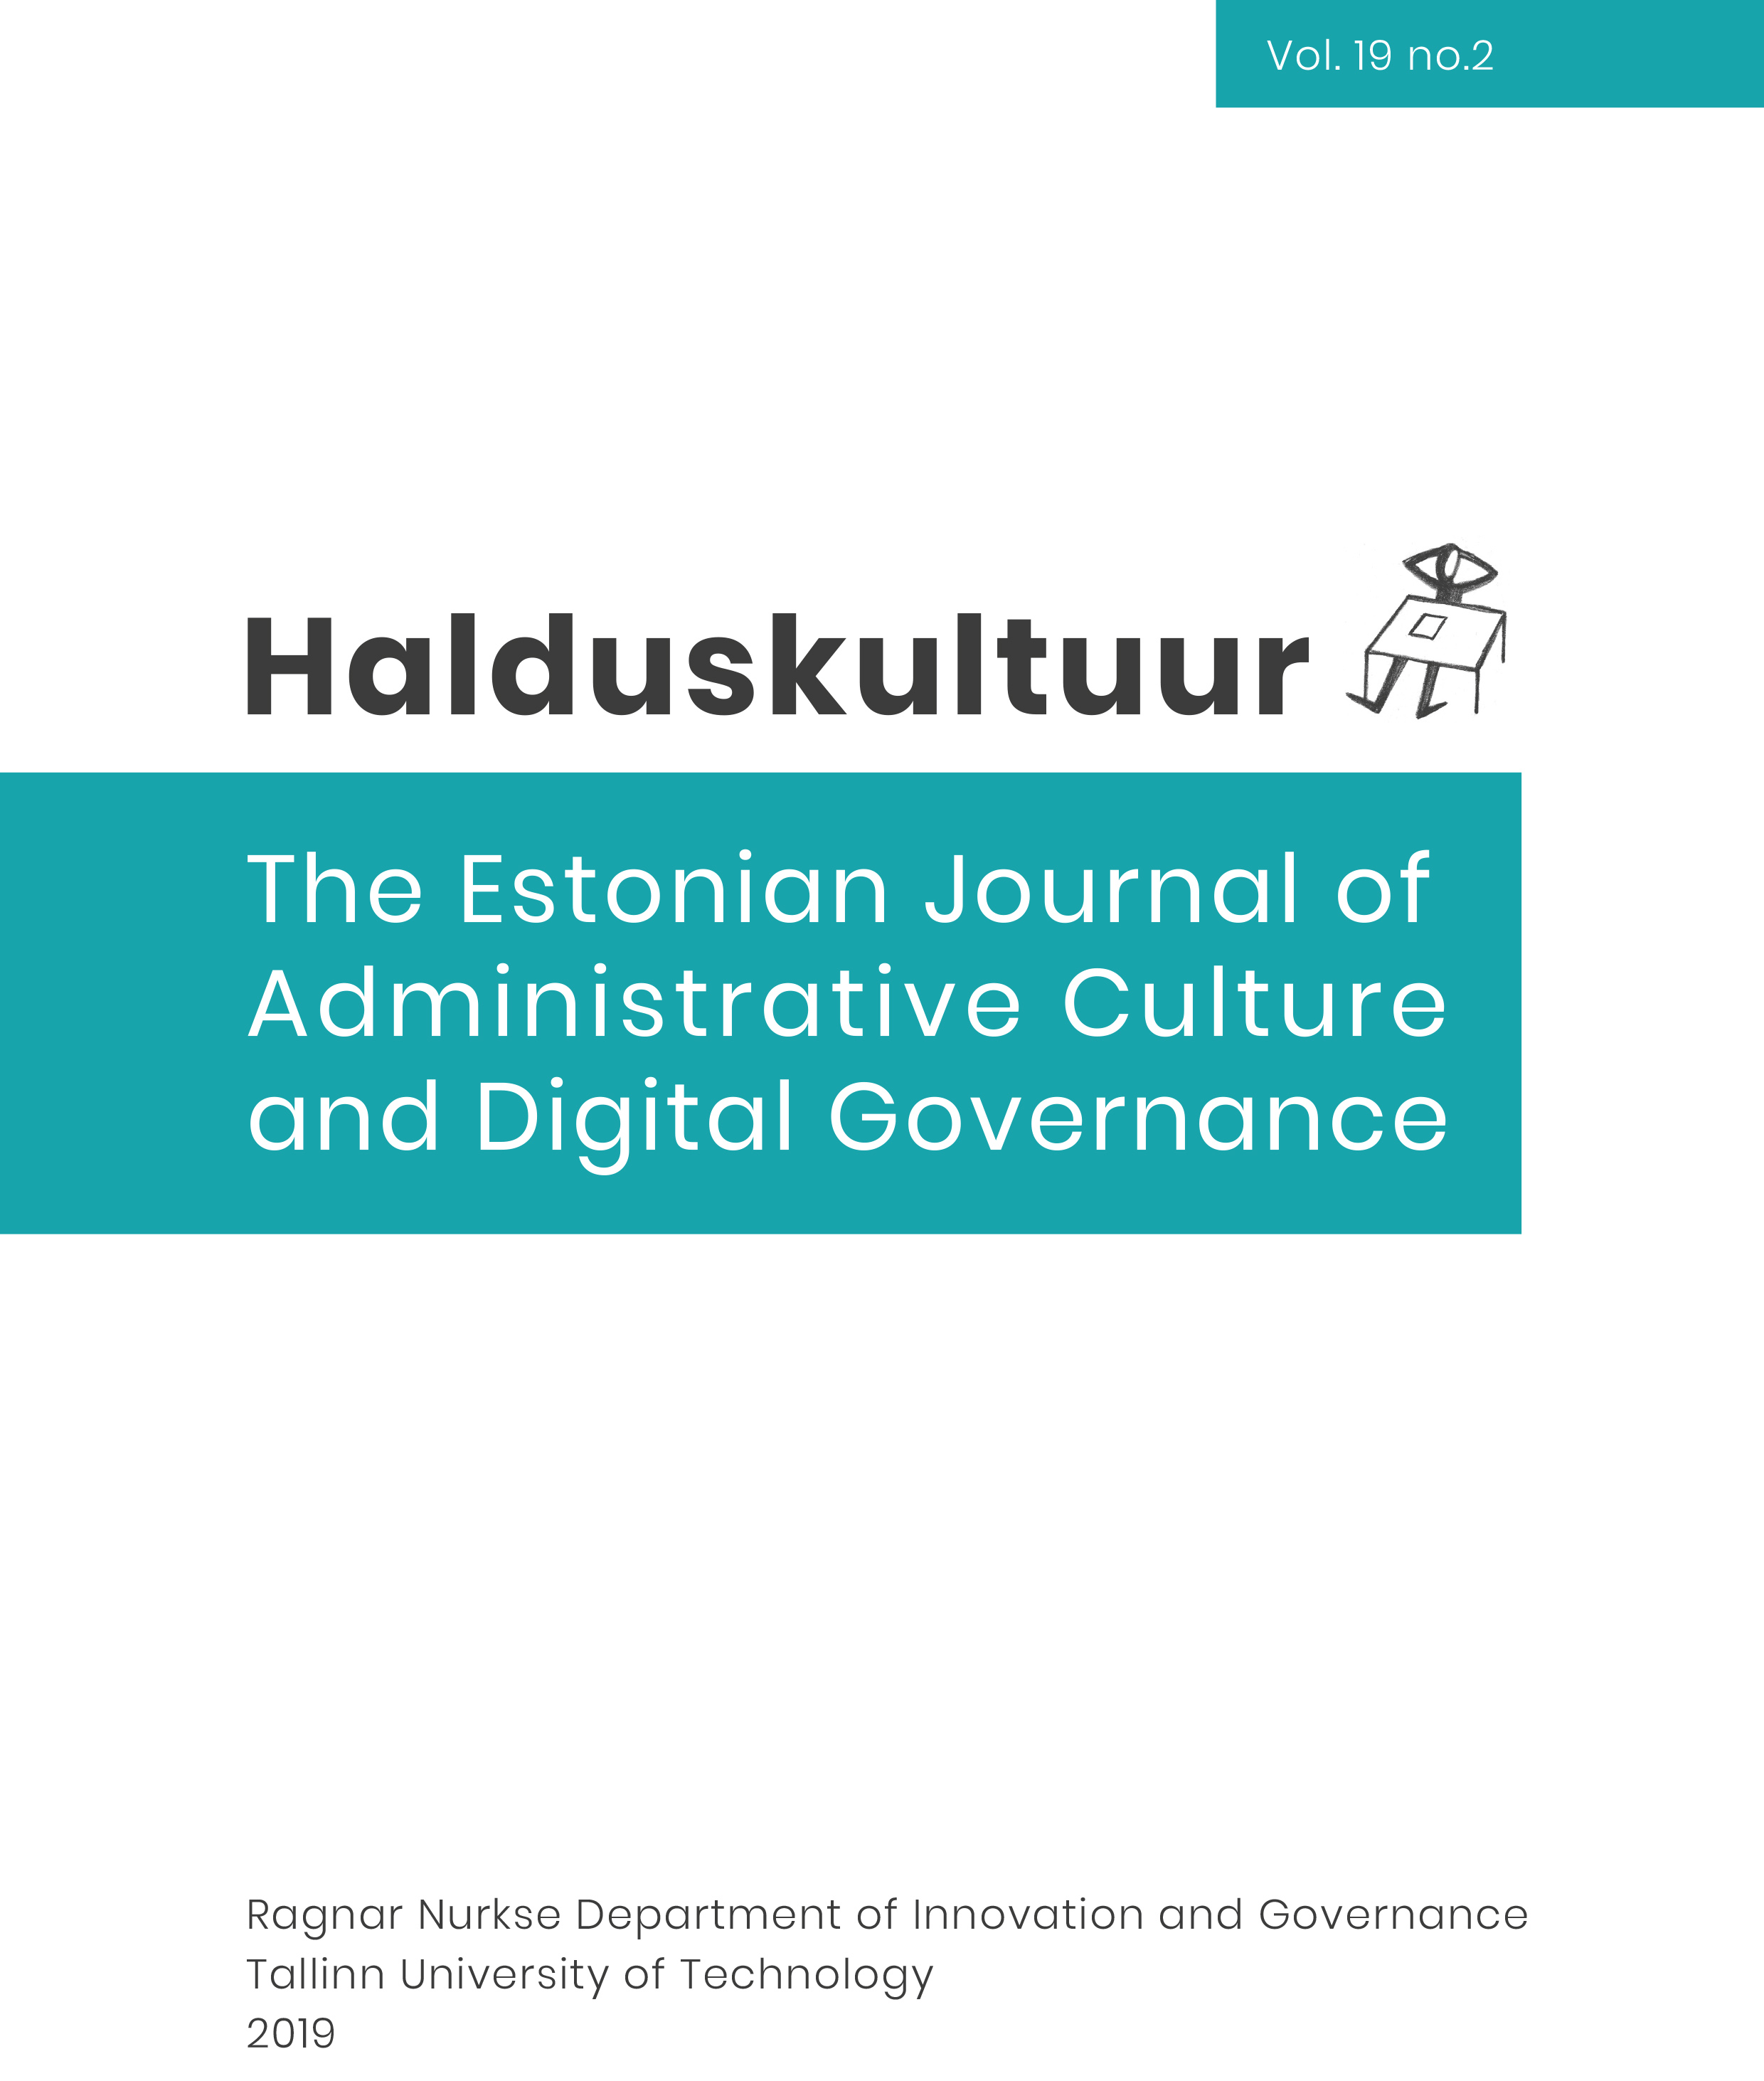 Agile Stability: Relaunching Halduskultuur – The Estonian Journal of Administrative Culture and Digital Governance